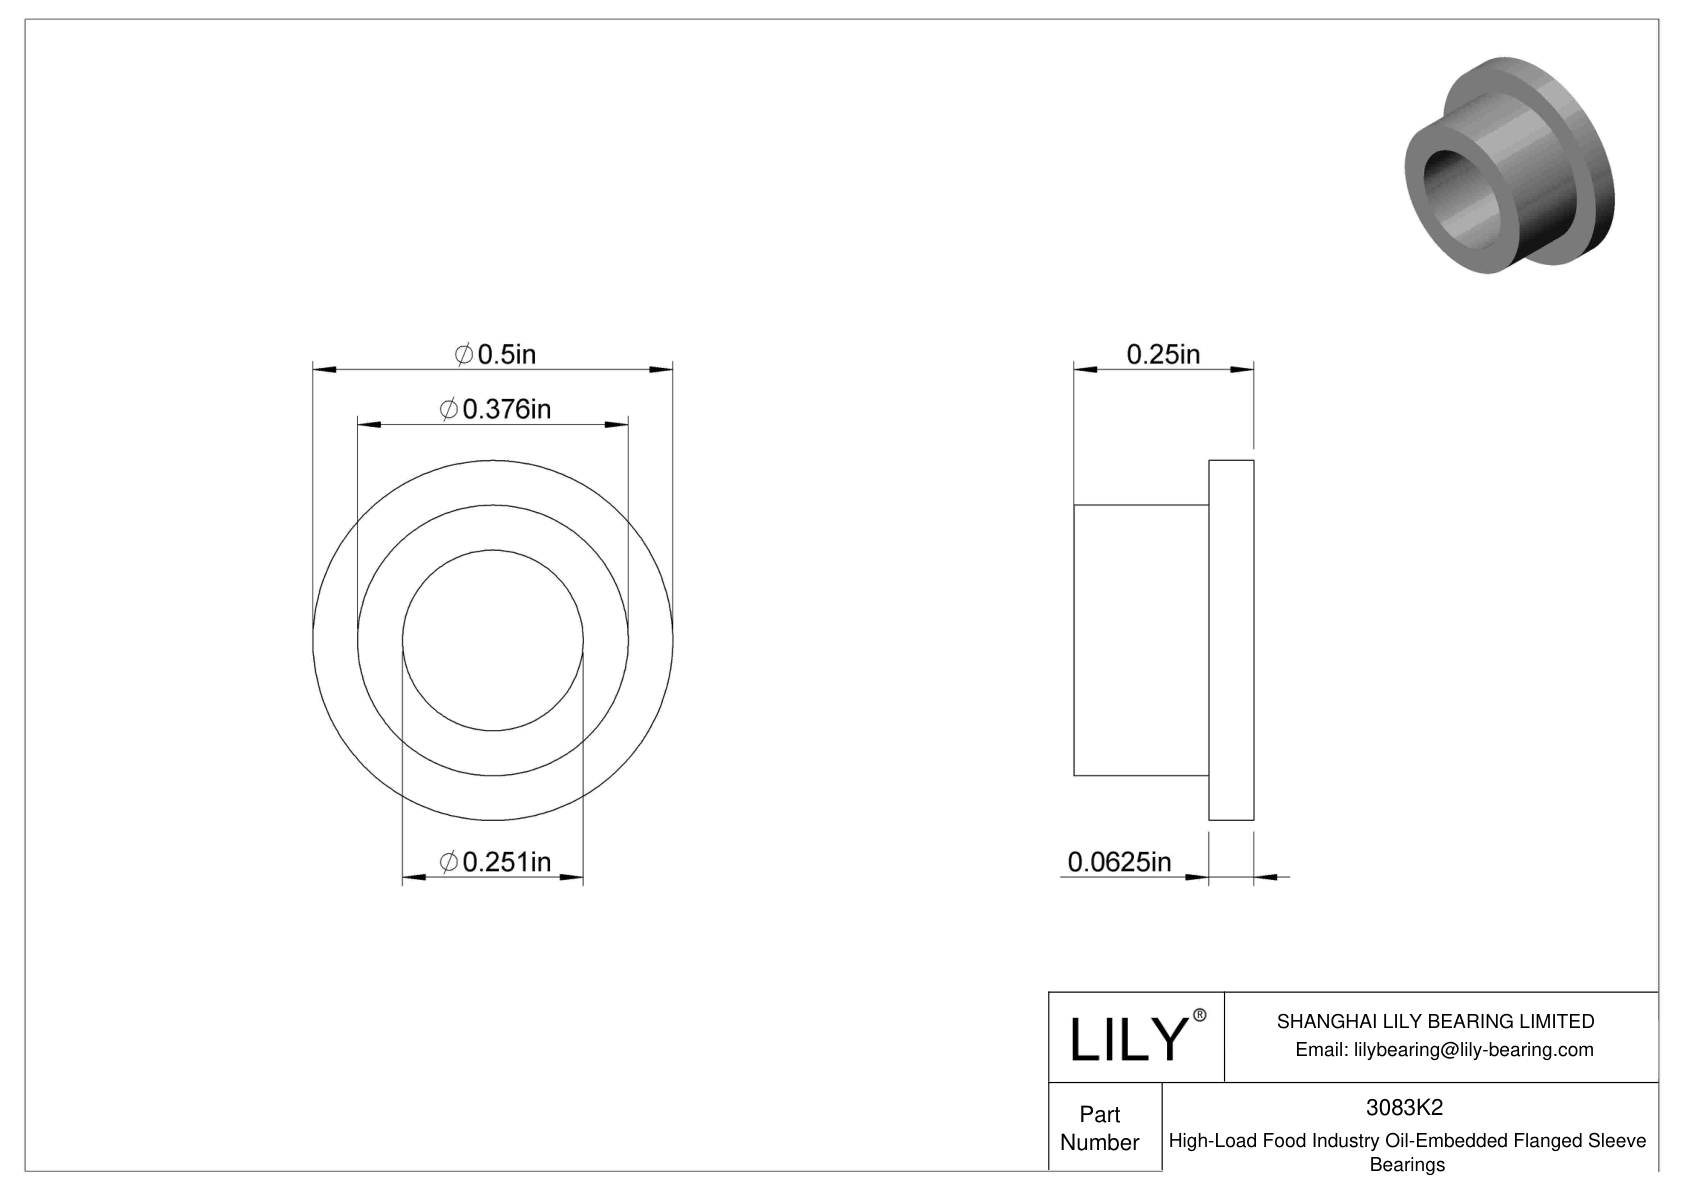 DAIDKC High-Load Food Industry Oil-Embedded Flanged Sleeve Bearings cad drawing